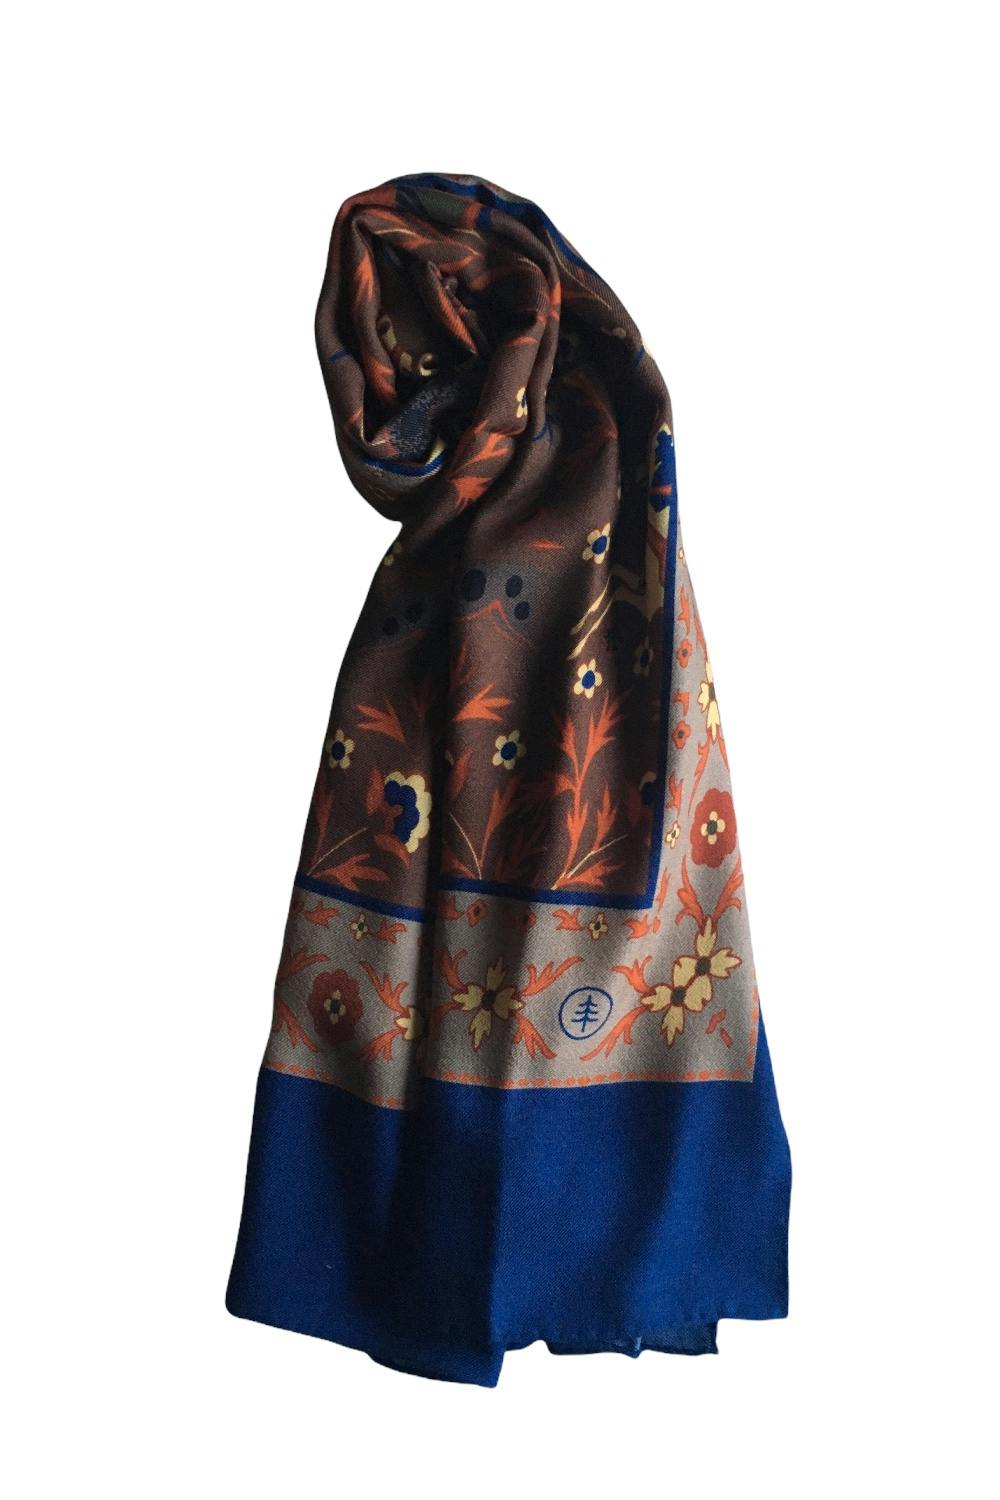 Motif Printed Wool/Silk Scarf - Navy Blue - Granqvist - Ties, shirts and  accessories